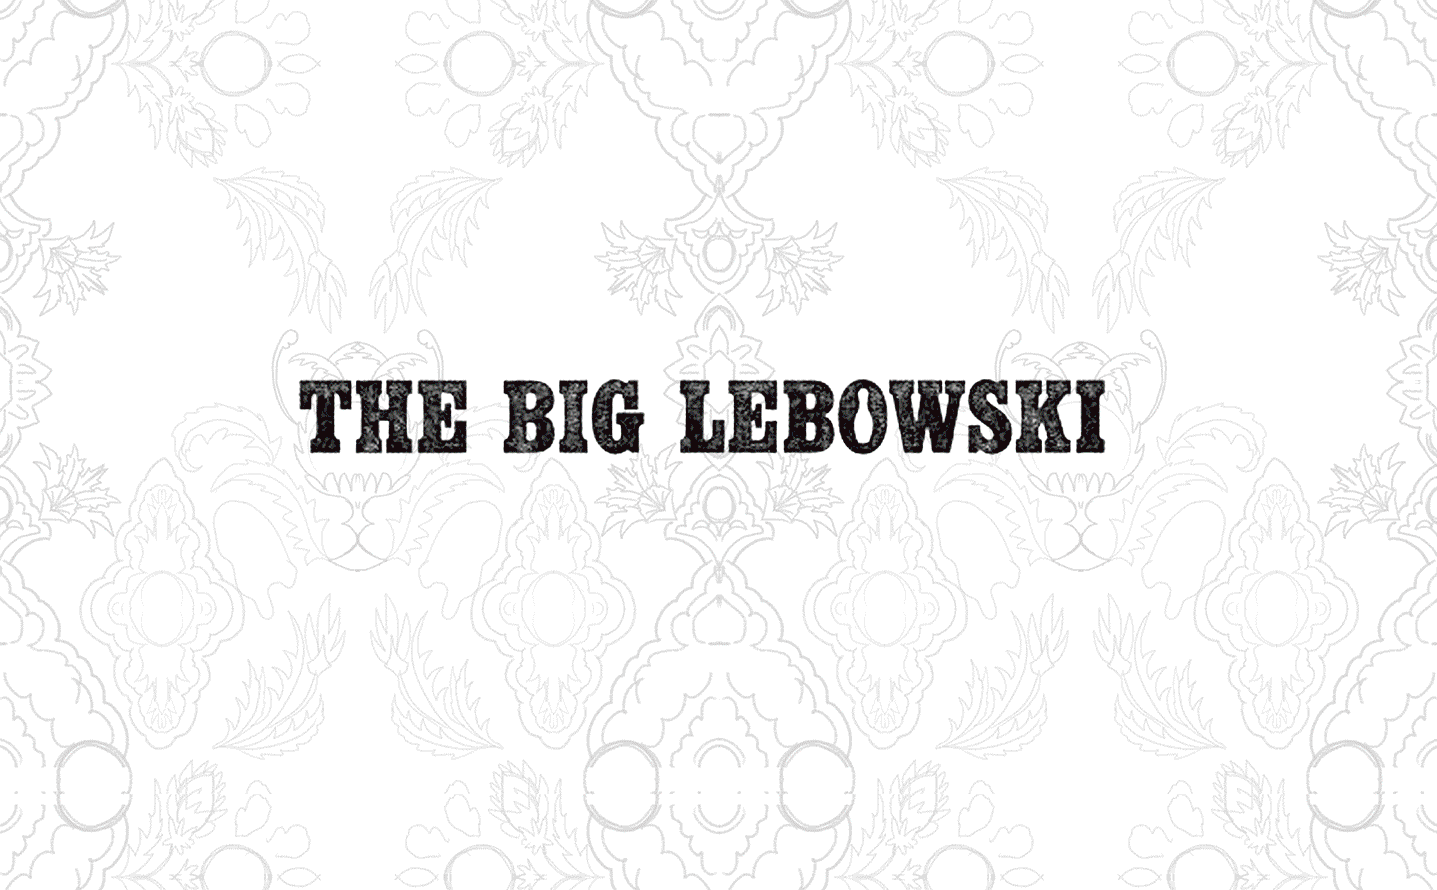 Abide from start to finish | The Big Lebowski | Universal + Hygge & West